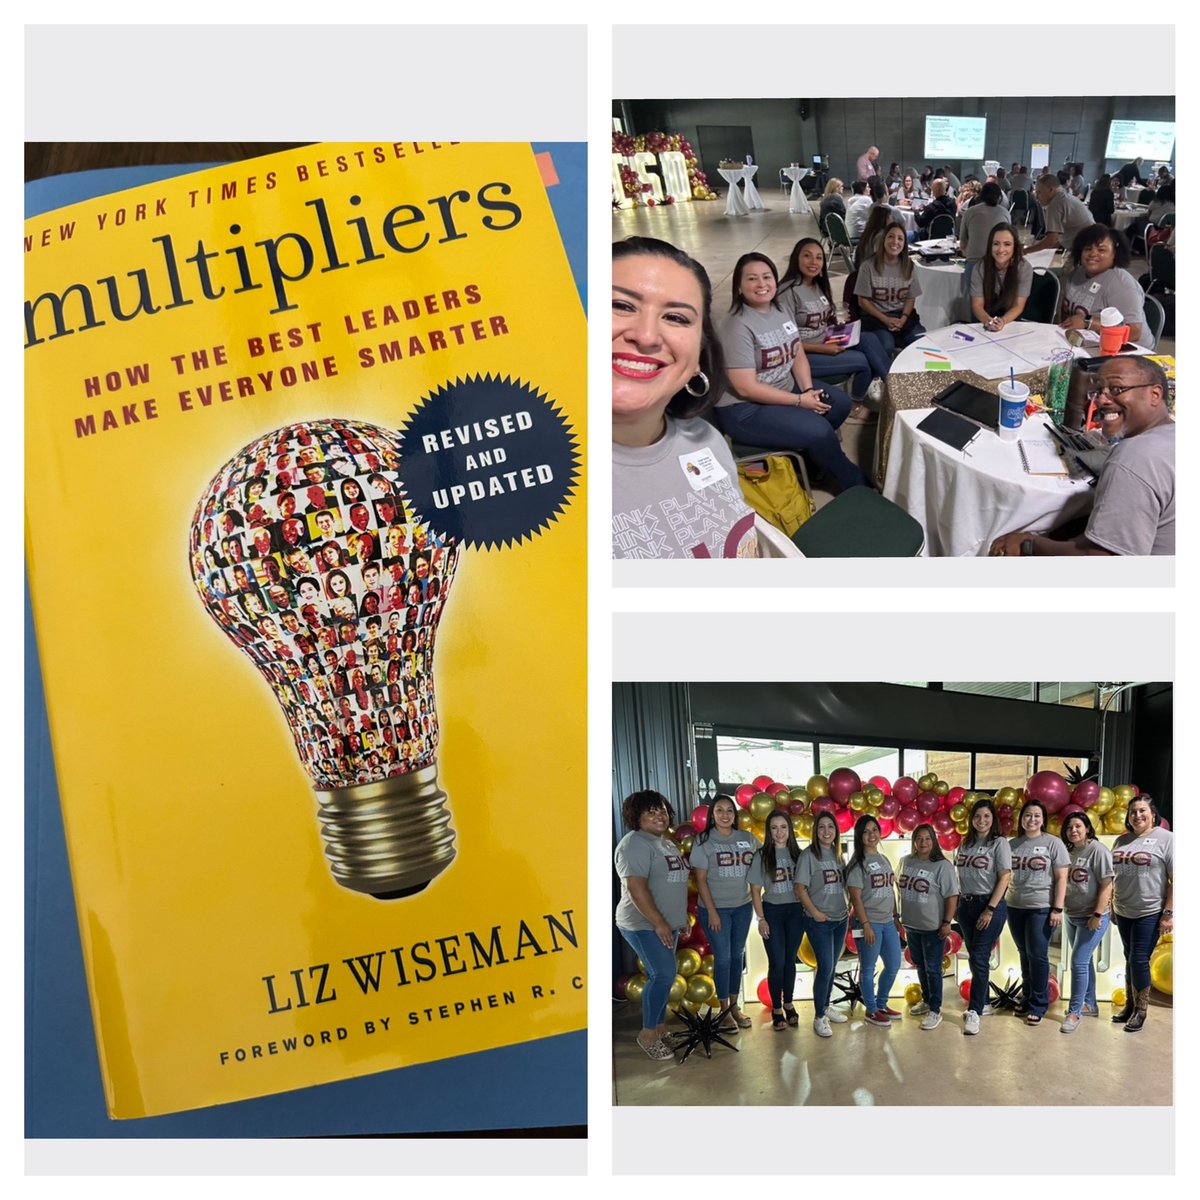 Day of 1 @EISDofSA Think Play Win BIG Leadership Retreat done! Feeling the #Multipliers effect from the @EISDTeachLearn department! #GoBigGoEdgewood